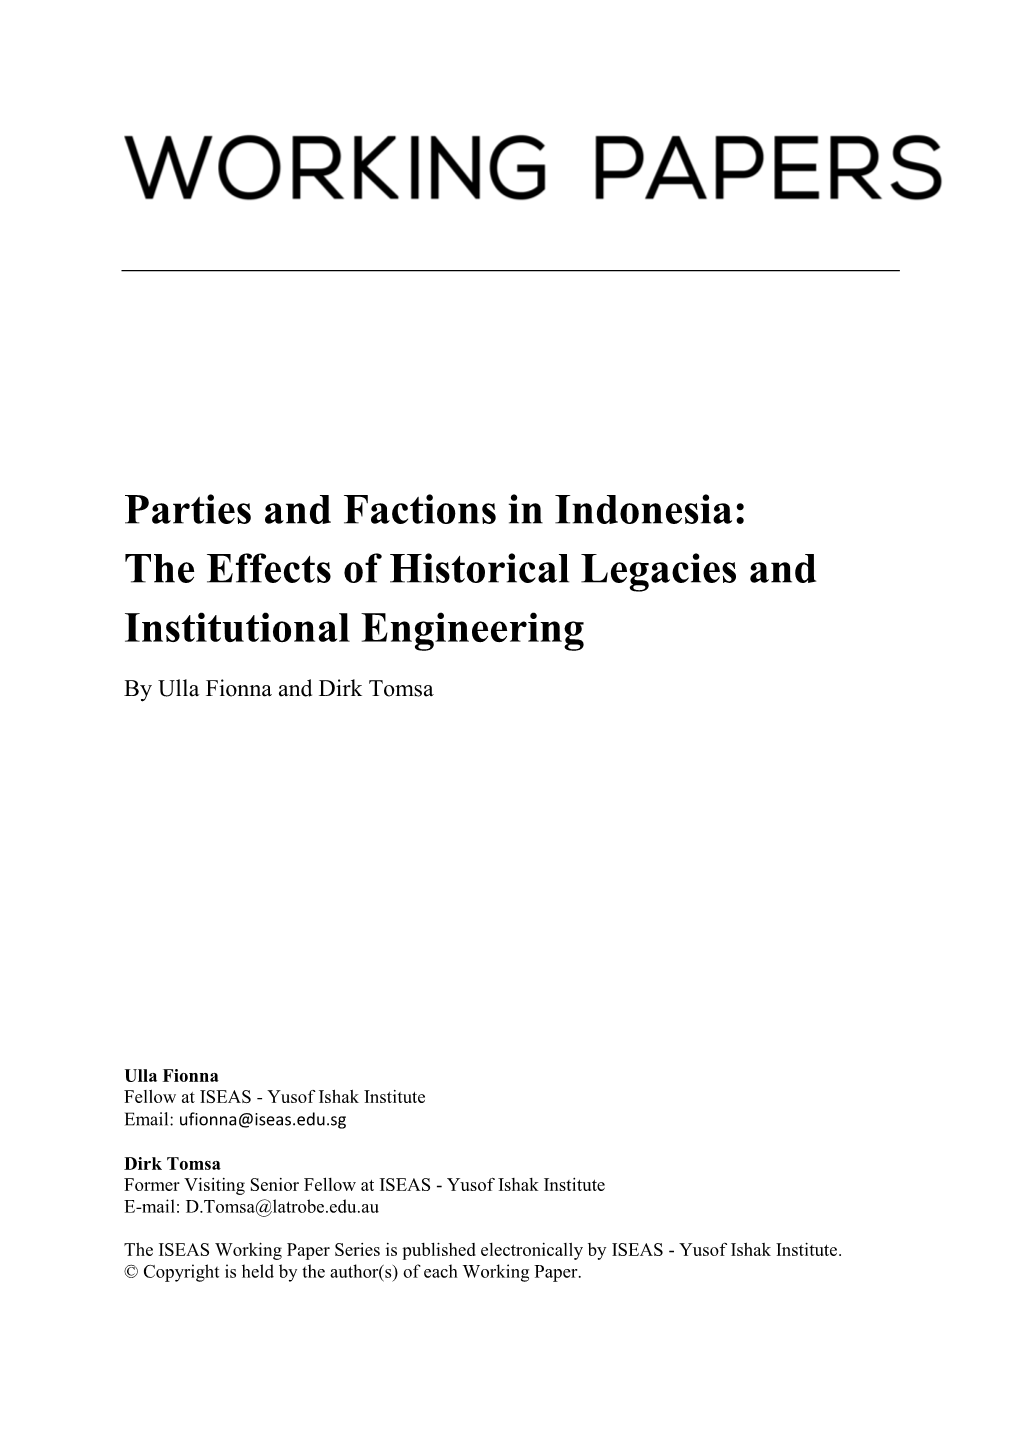 Parties and Factions in Indonesia: the Effects of Historical Legacies and Institutional Engineering